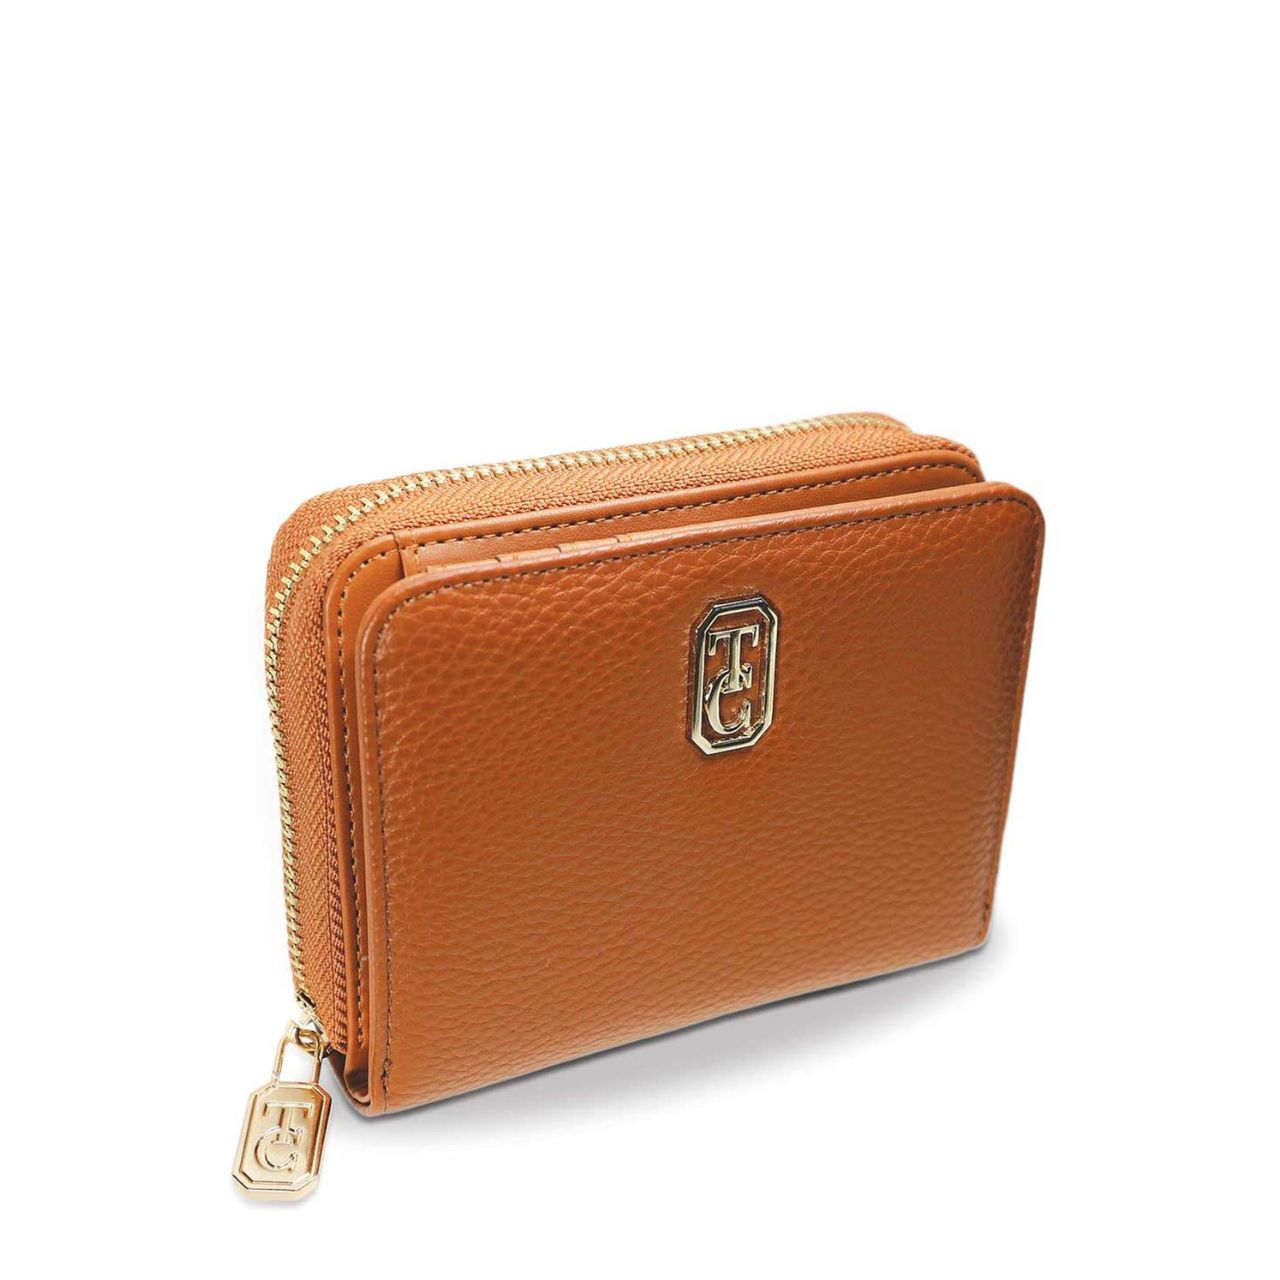 The Windsor Purse - Tan Small by Tipperary  Perfectly sized this versatile wallet will compliment any handbag. Packed into a compact shape, designed to make your life easier!